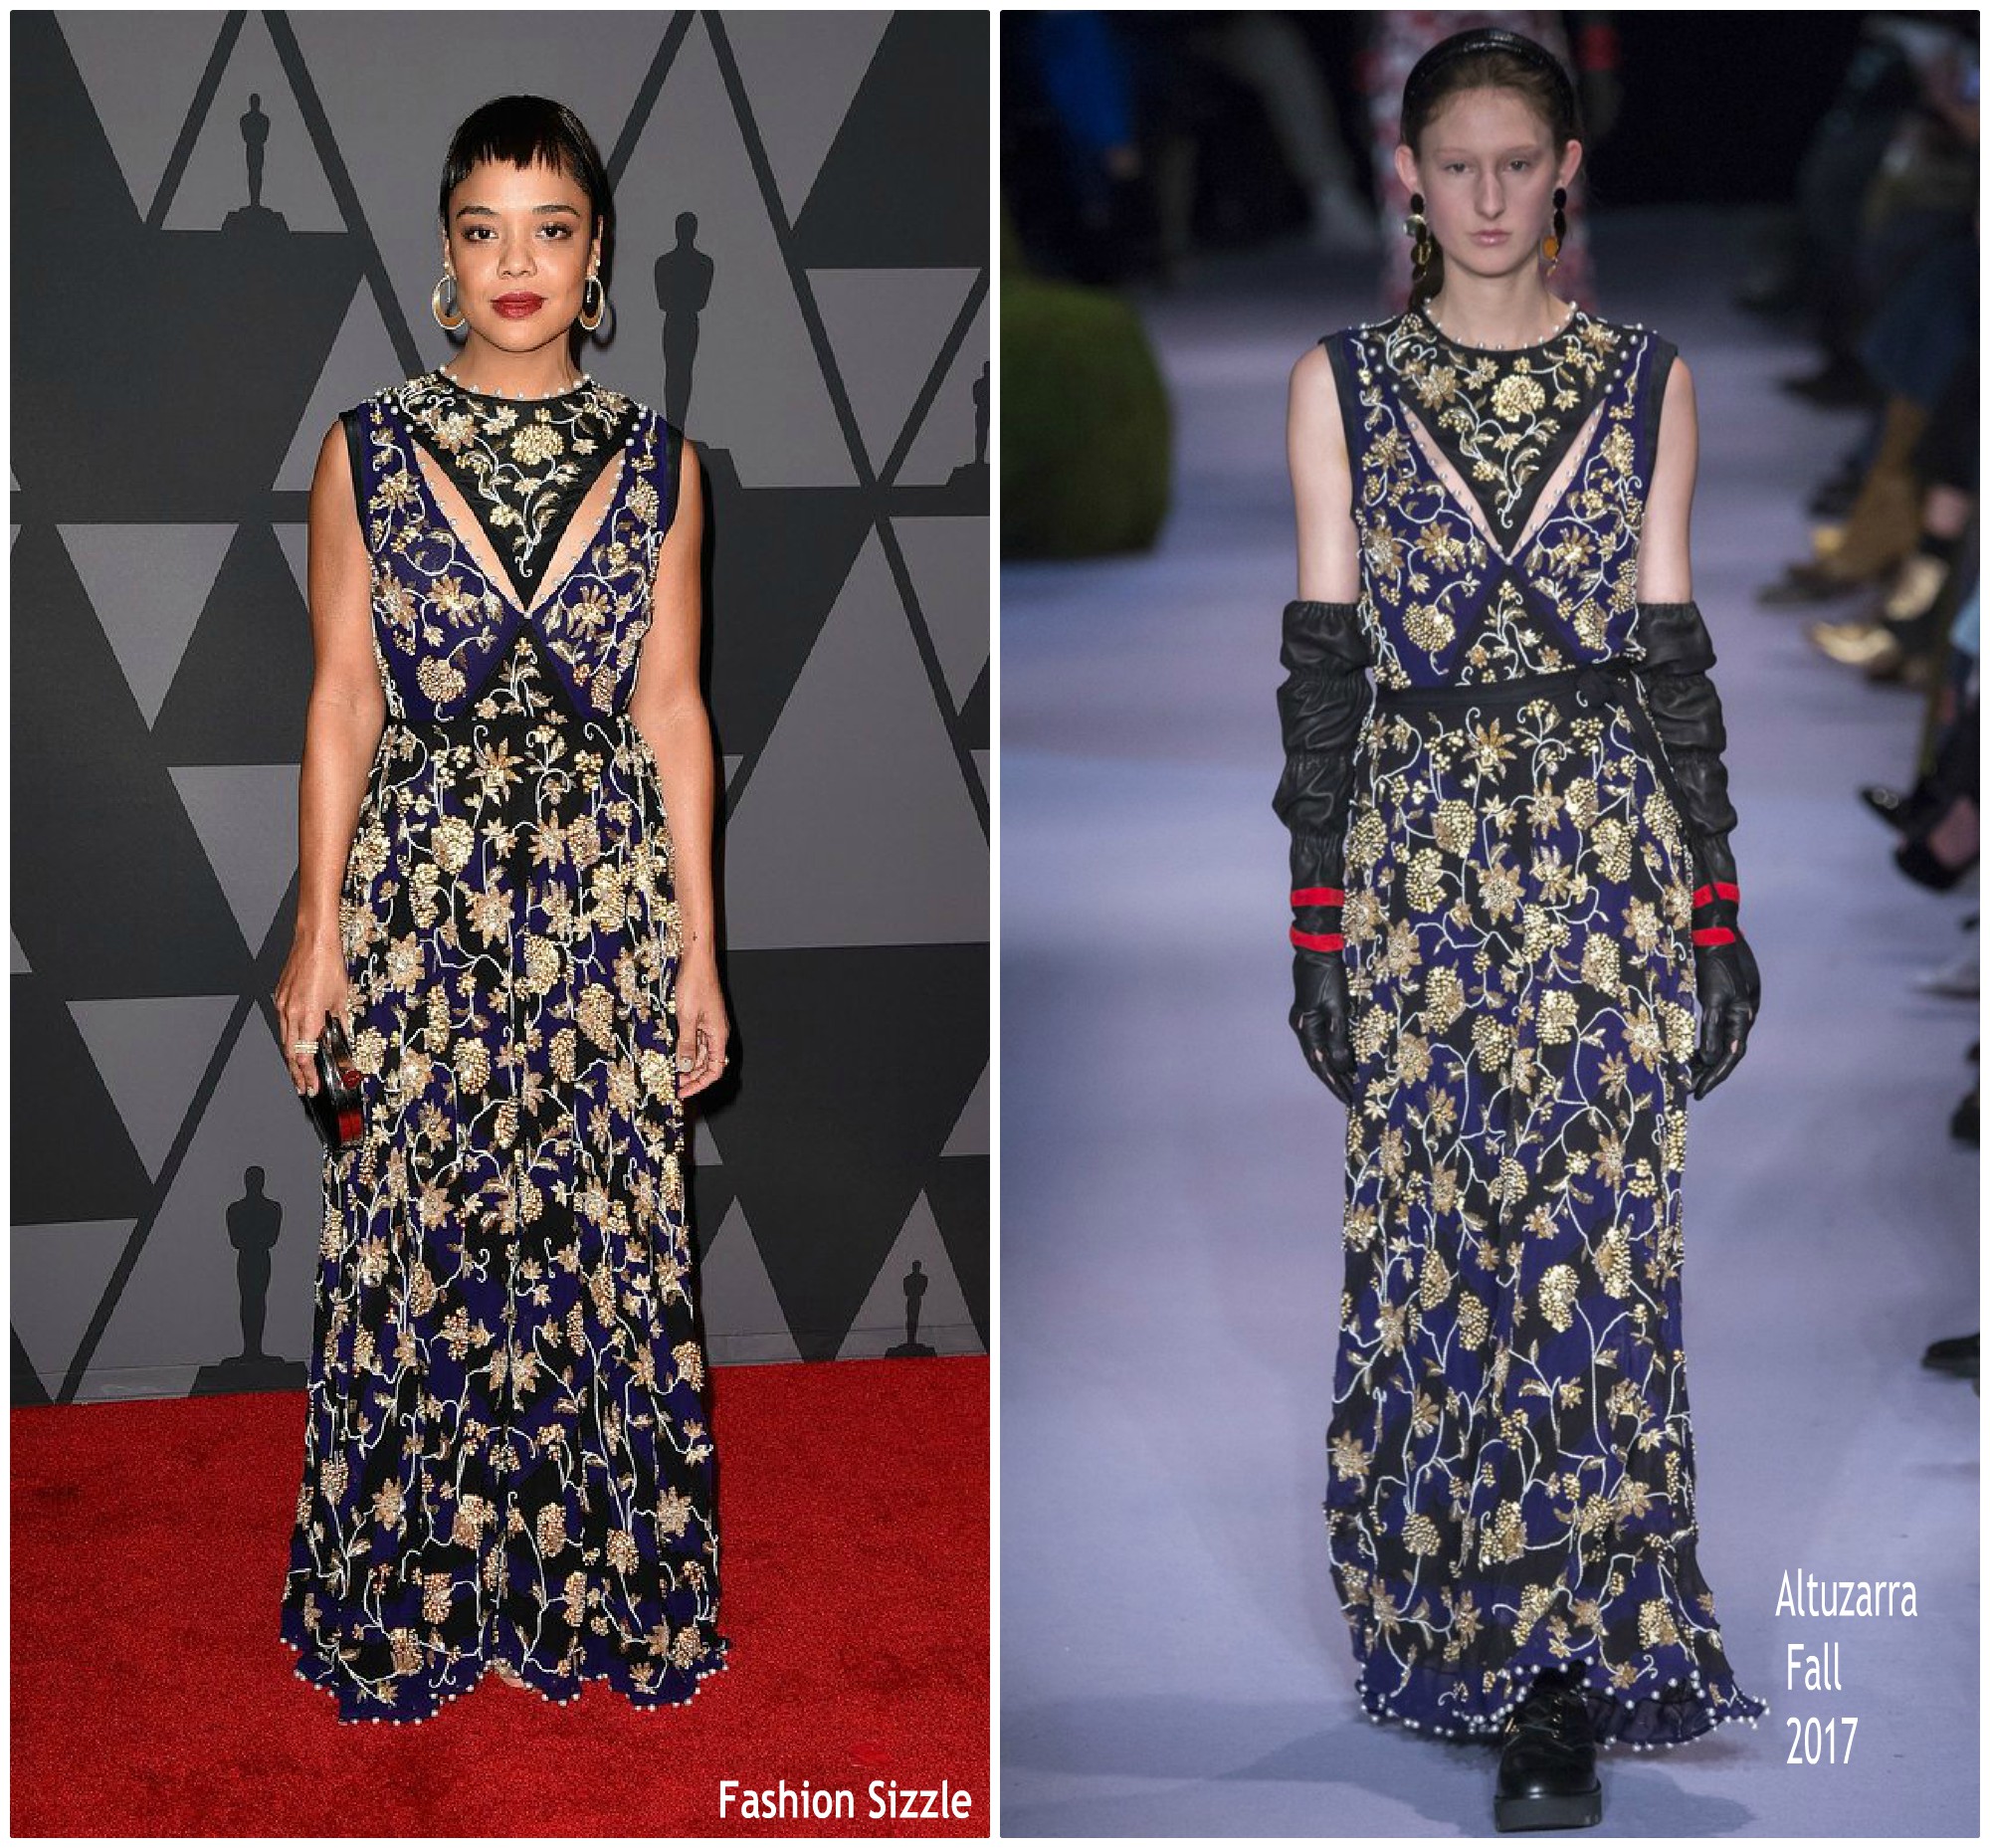 teesa-thompson-in-altuzarra-2017-academy-of-motion-picture-arts-sciences-governors-awards